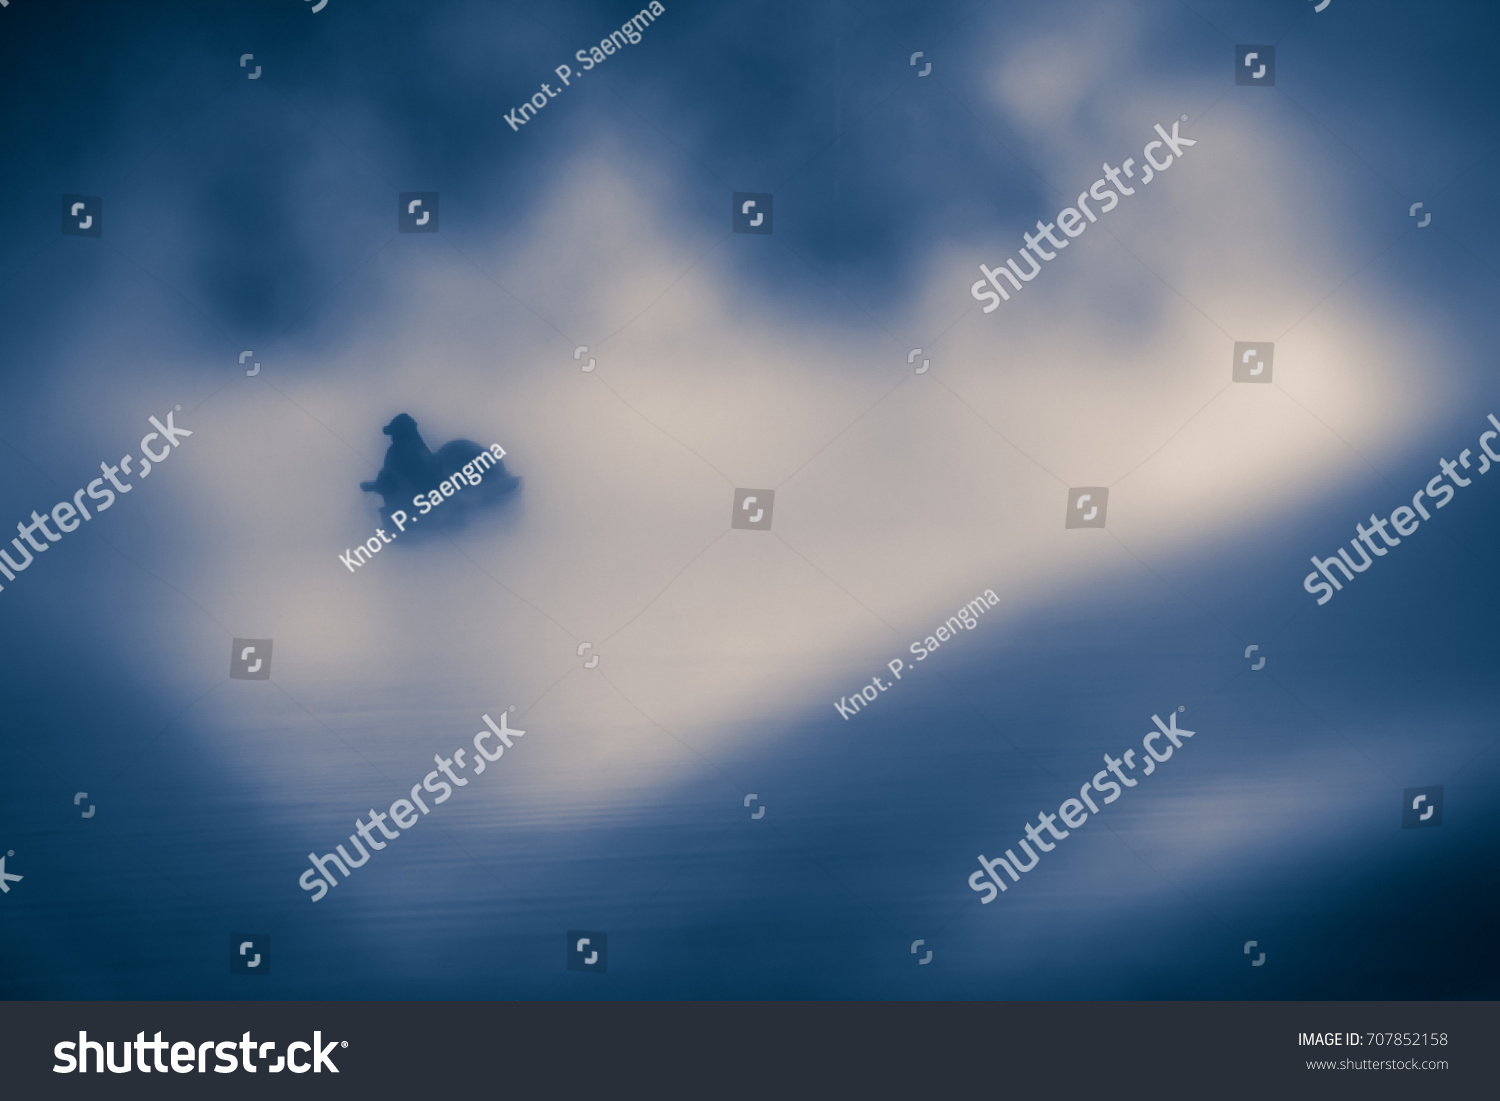 soft focus blurred feeling blue lonely emotion abstract conceptual, person on boat with white mist, low key grungy style image  #707852158